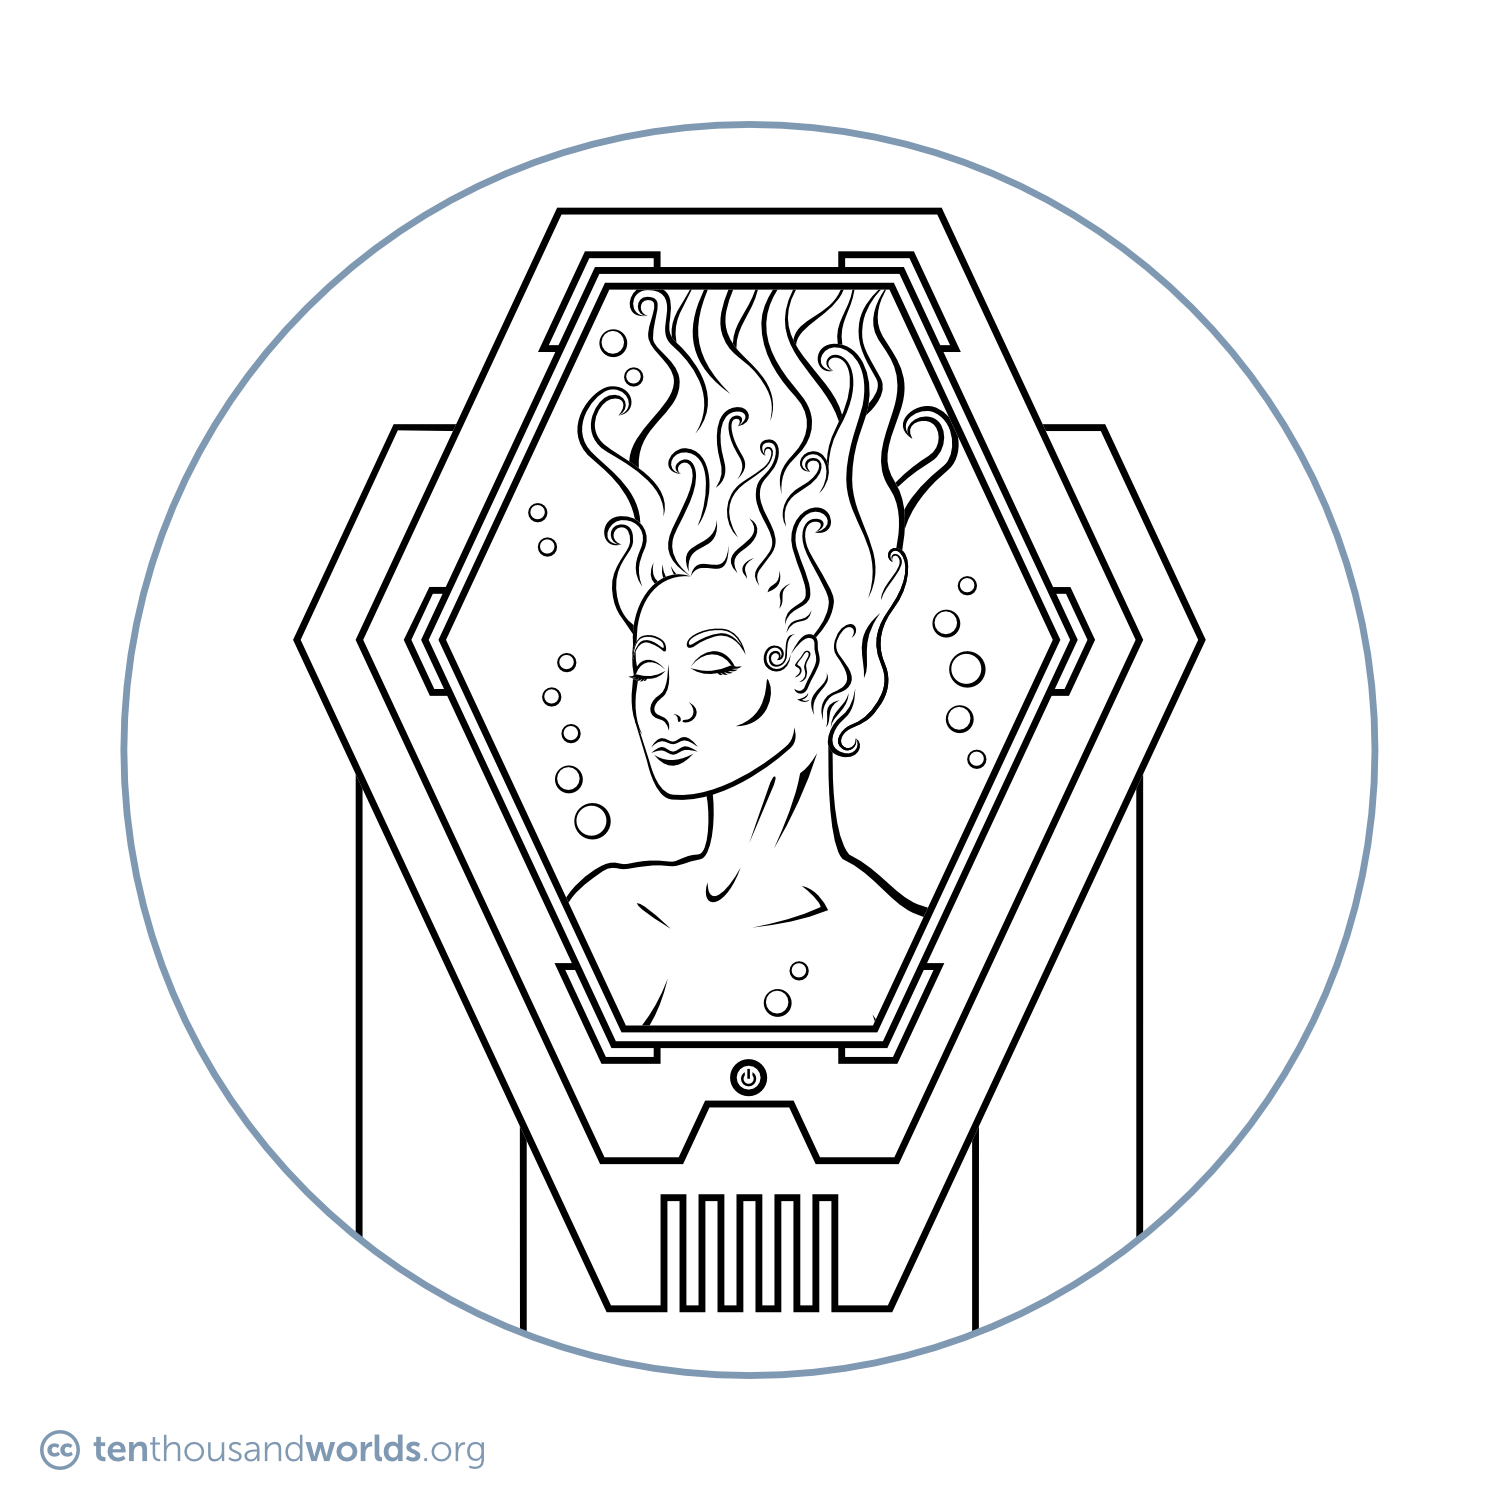 An ink outline of an upright coffin-like machine with a large hexagonal window, through which a woman can be seen floating inside in some sort of suspended animation.